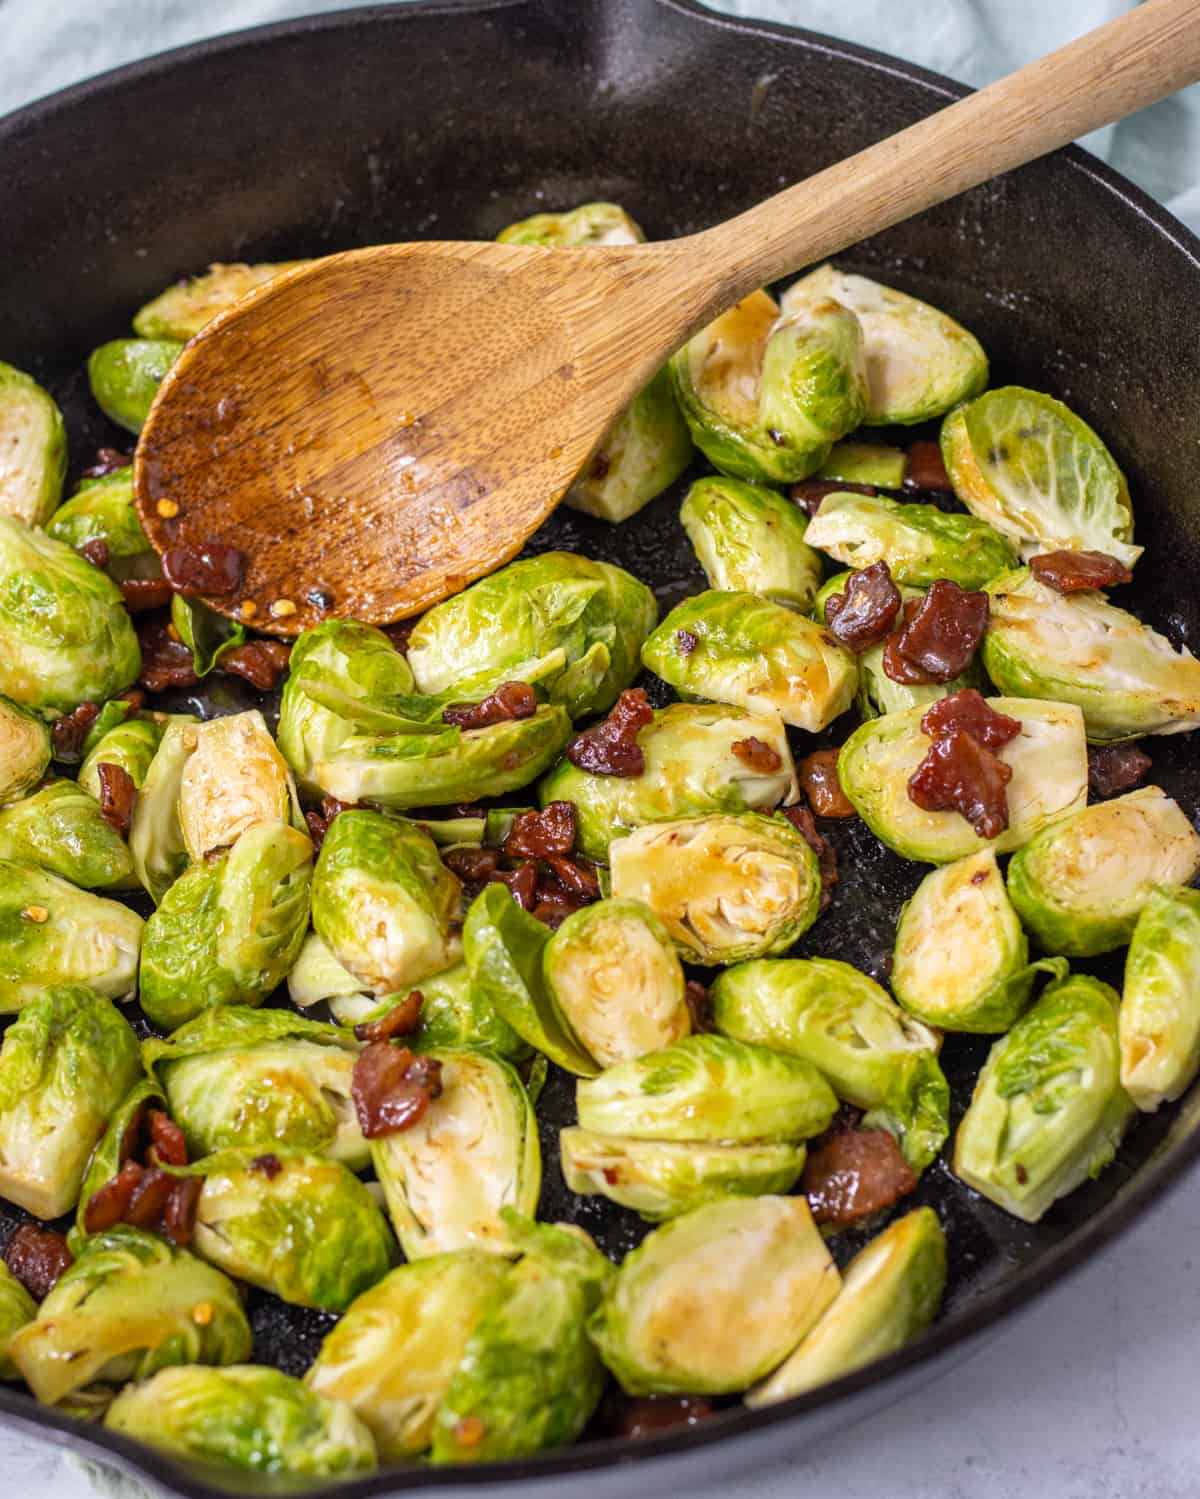 Halved Brussels sprouts and bacon tossed in a brown sugar sauce in a cast iron skillet with a wooden spoon.